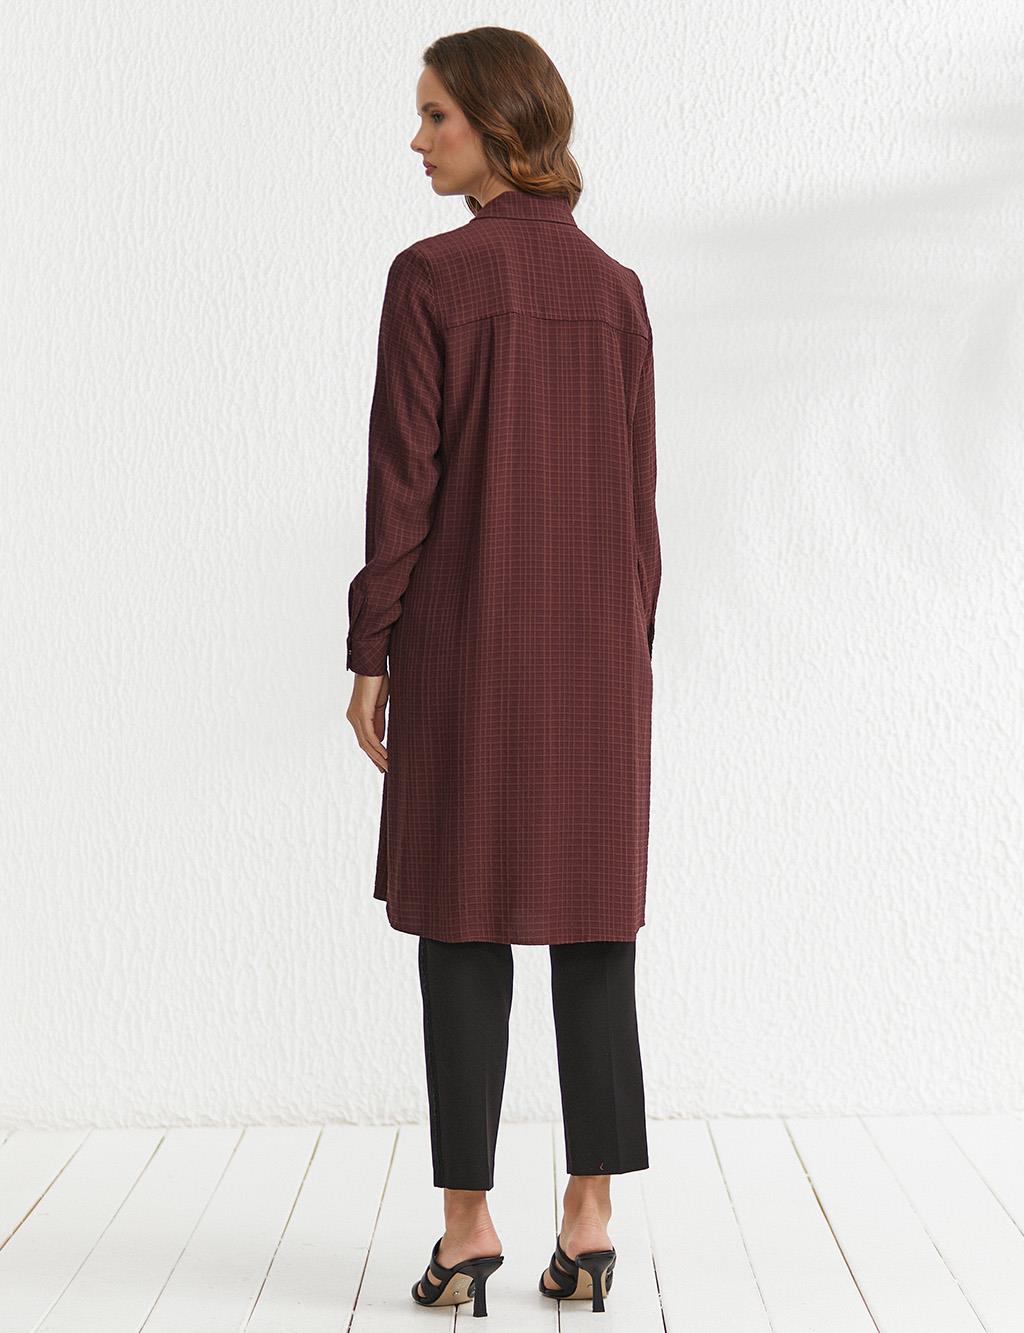 KYR Snap Closure Embossed Tunic Claret Red